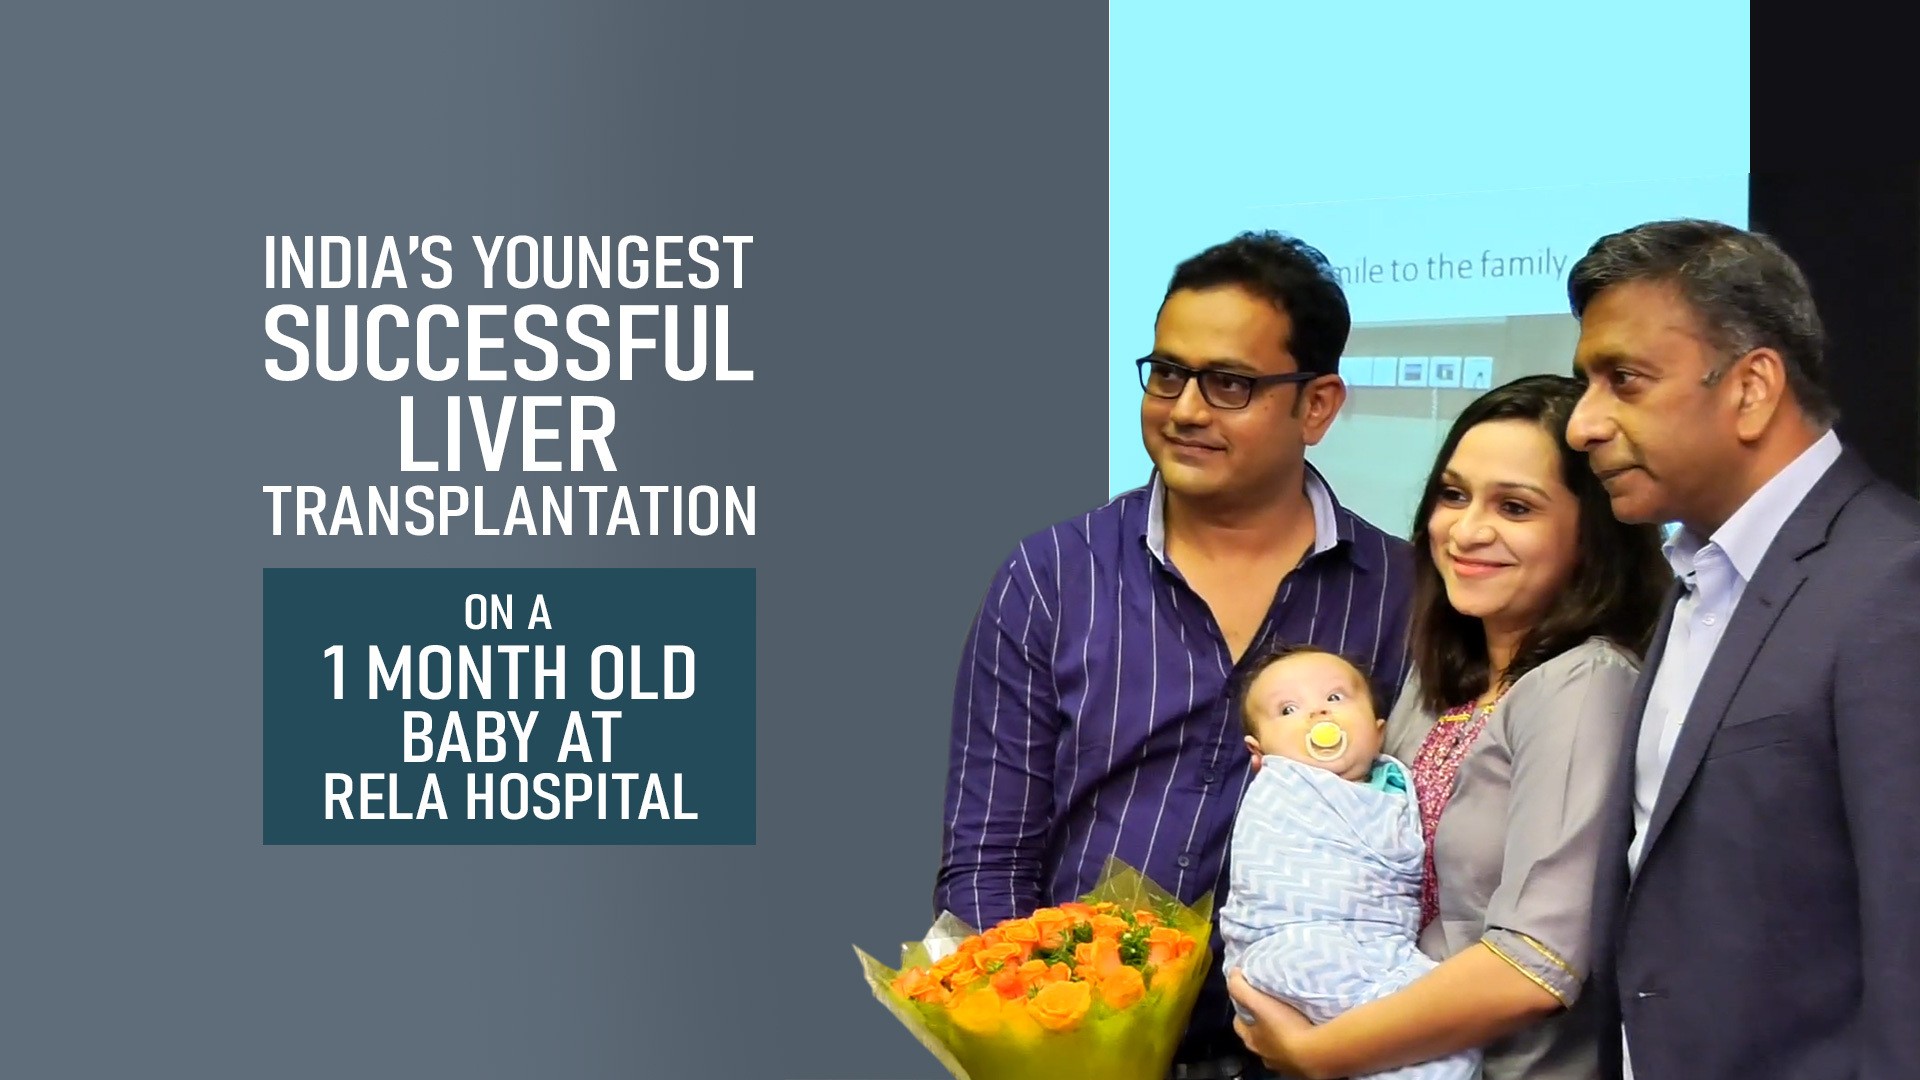 India’s Youngest Successful Liver Transplantation On A One-Month-Old Baby, Performed At Dr Rela Hospital